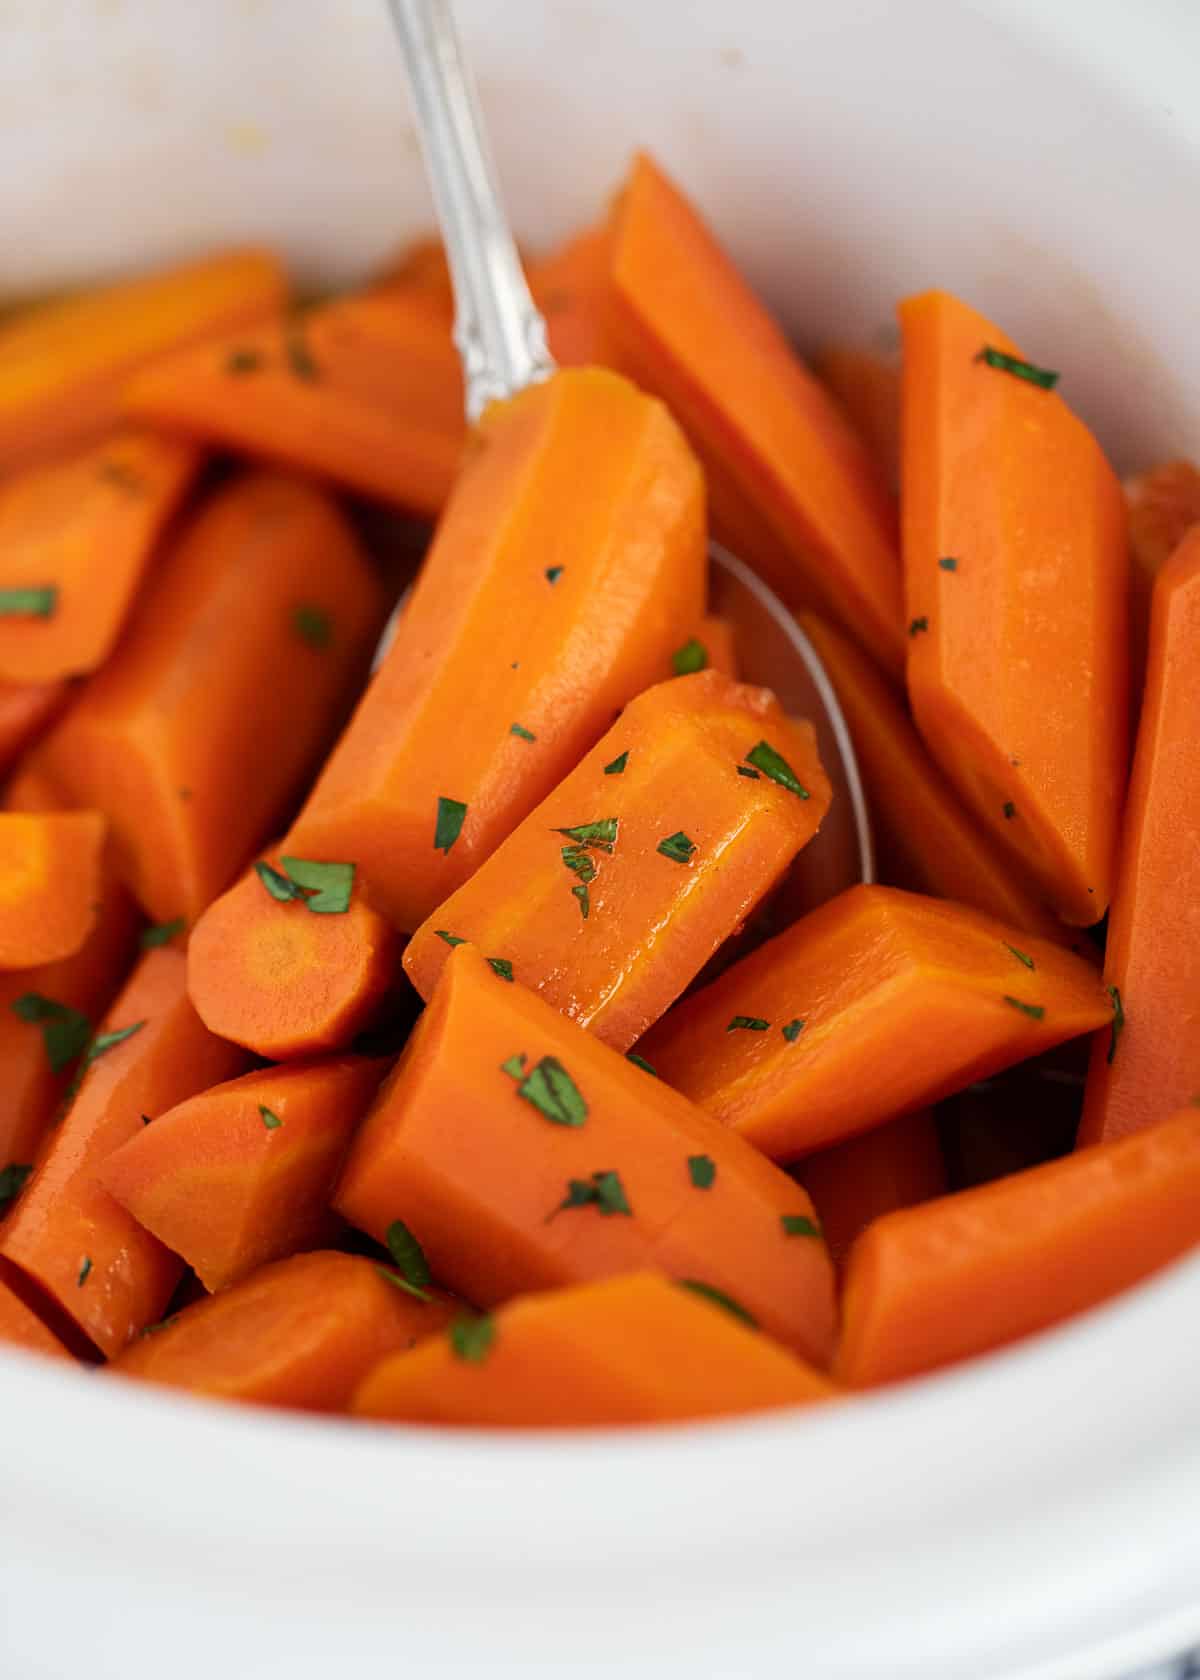 Cooked carrots in slow cooker.